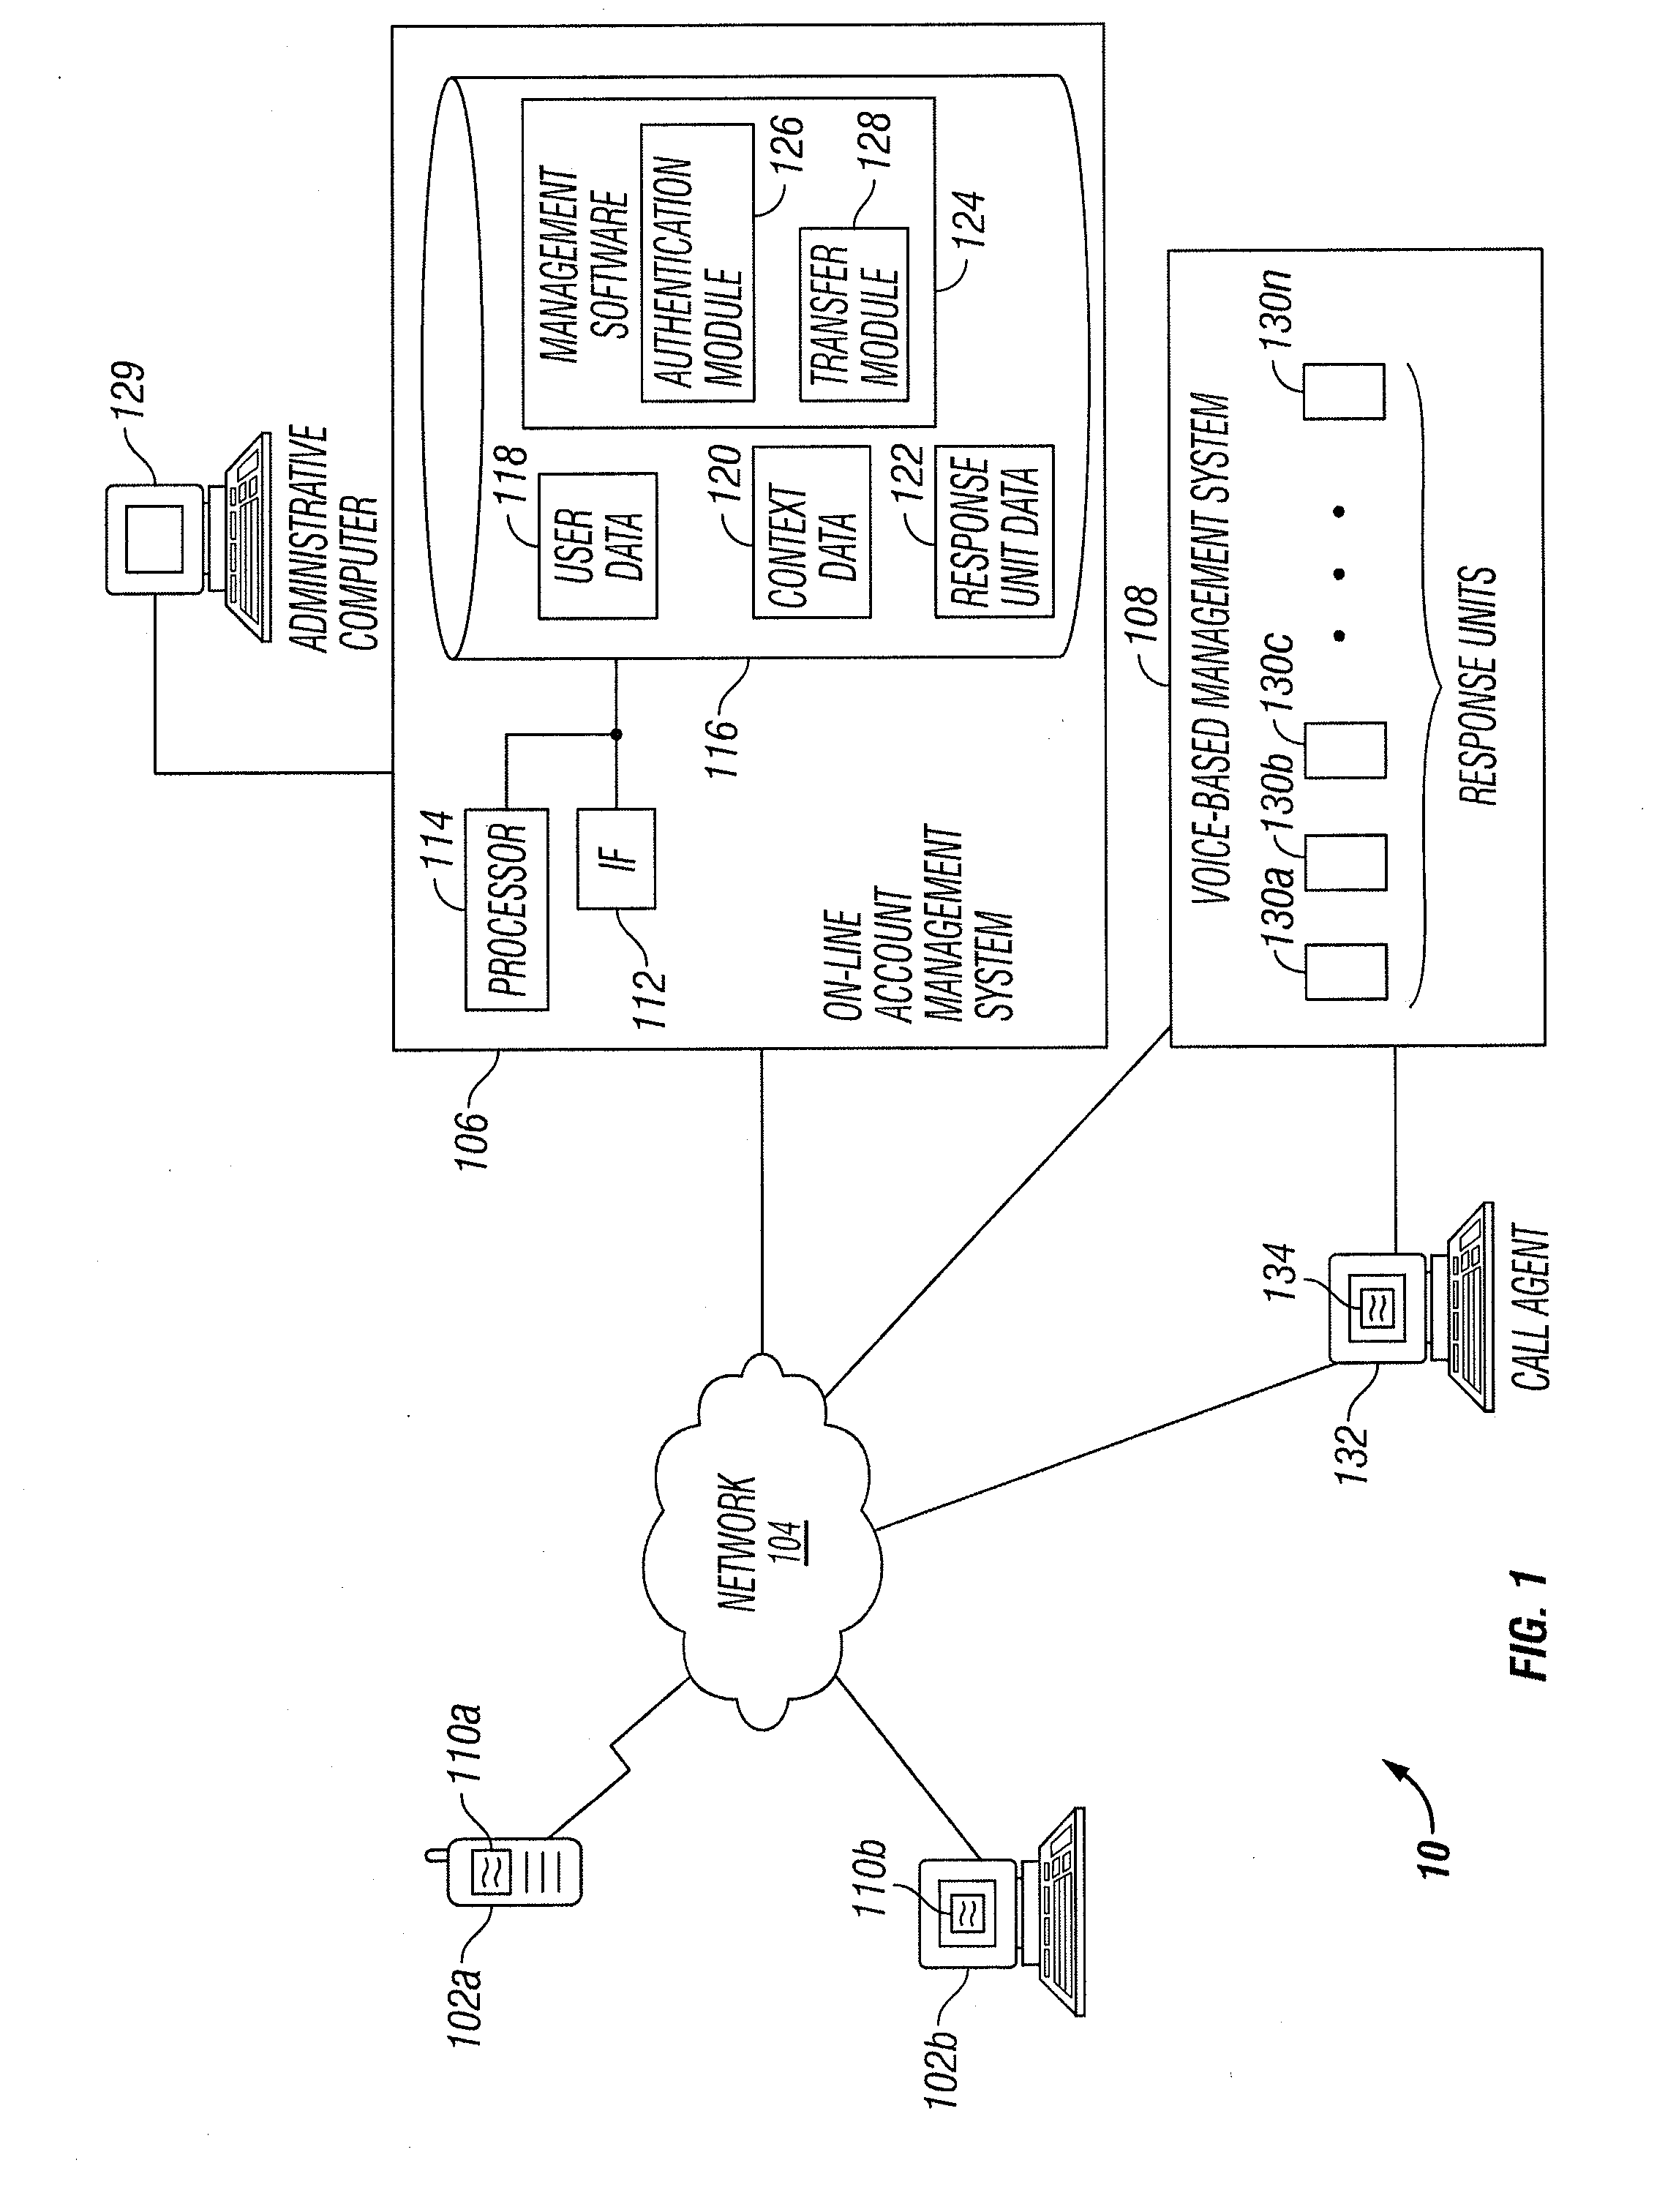 Communication with a Voice-Based Account Management System